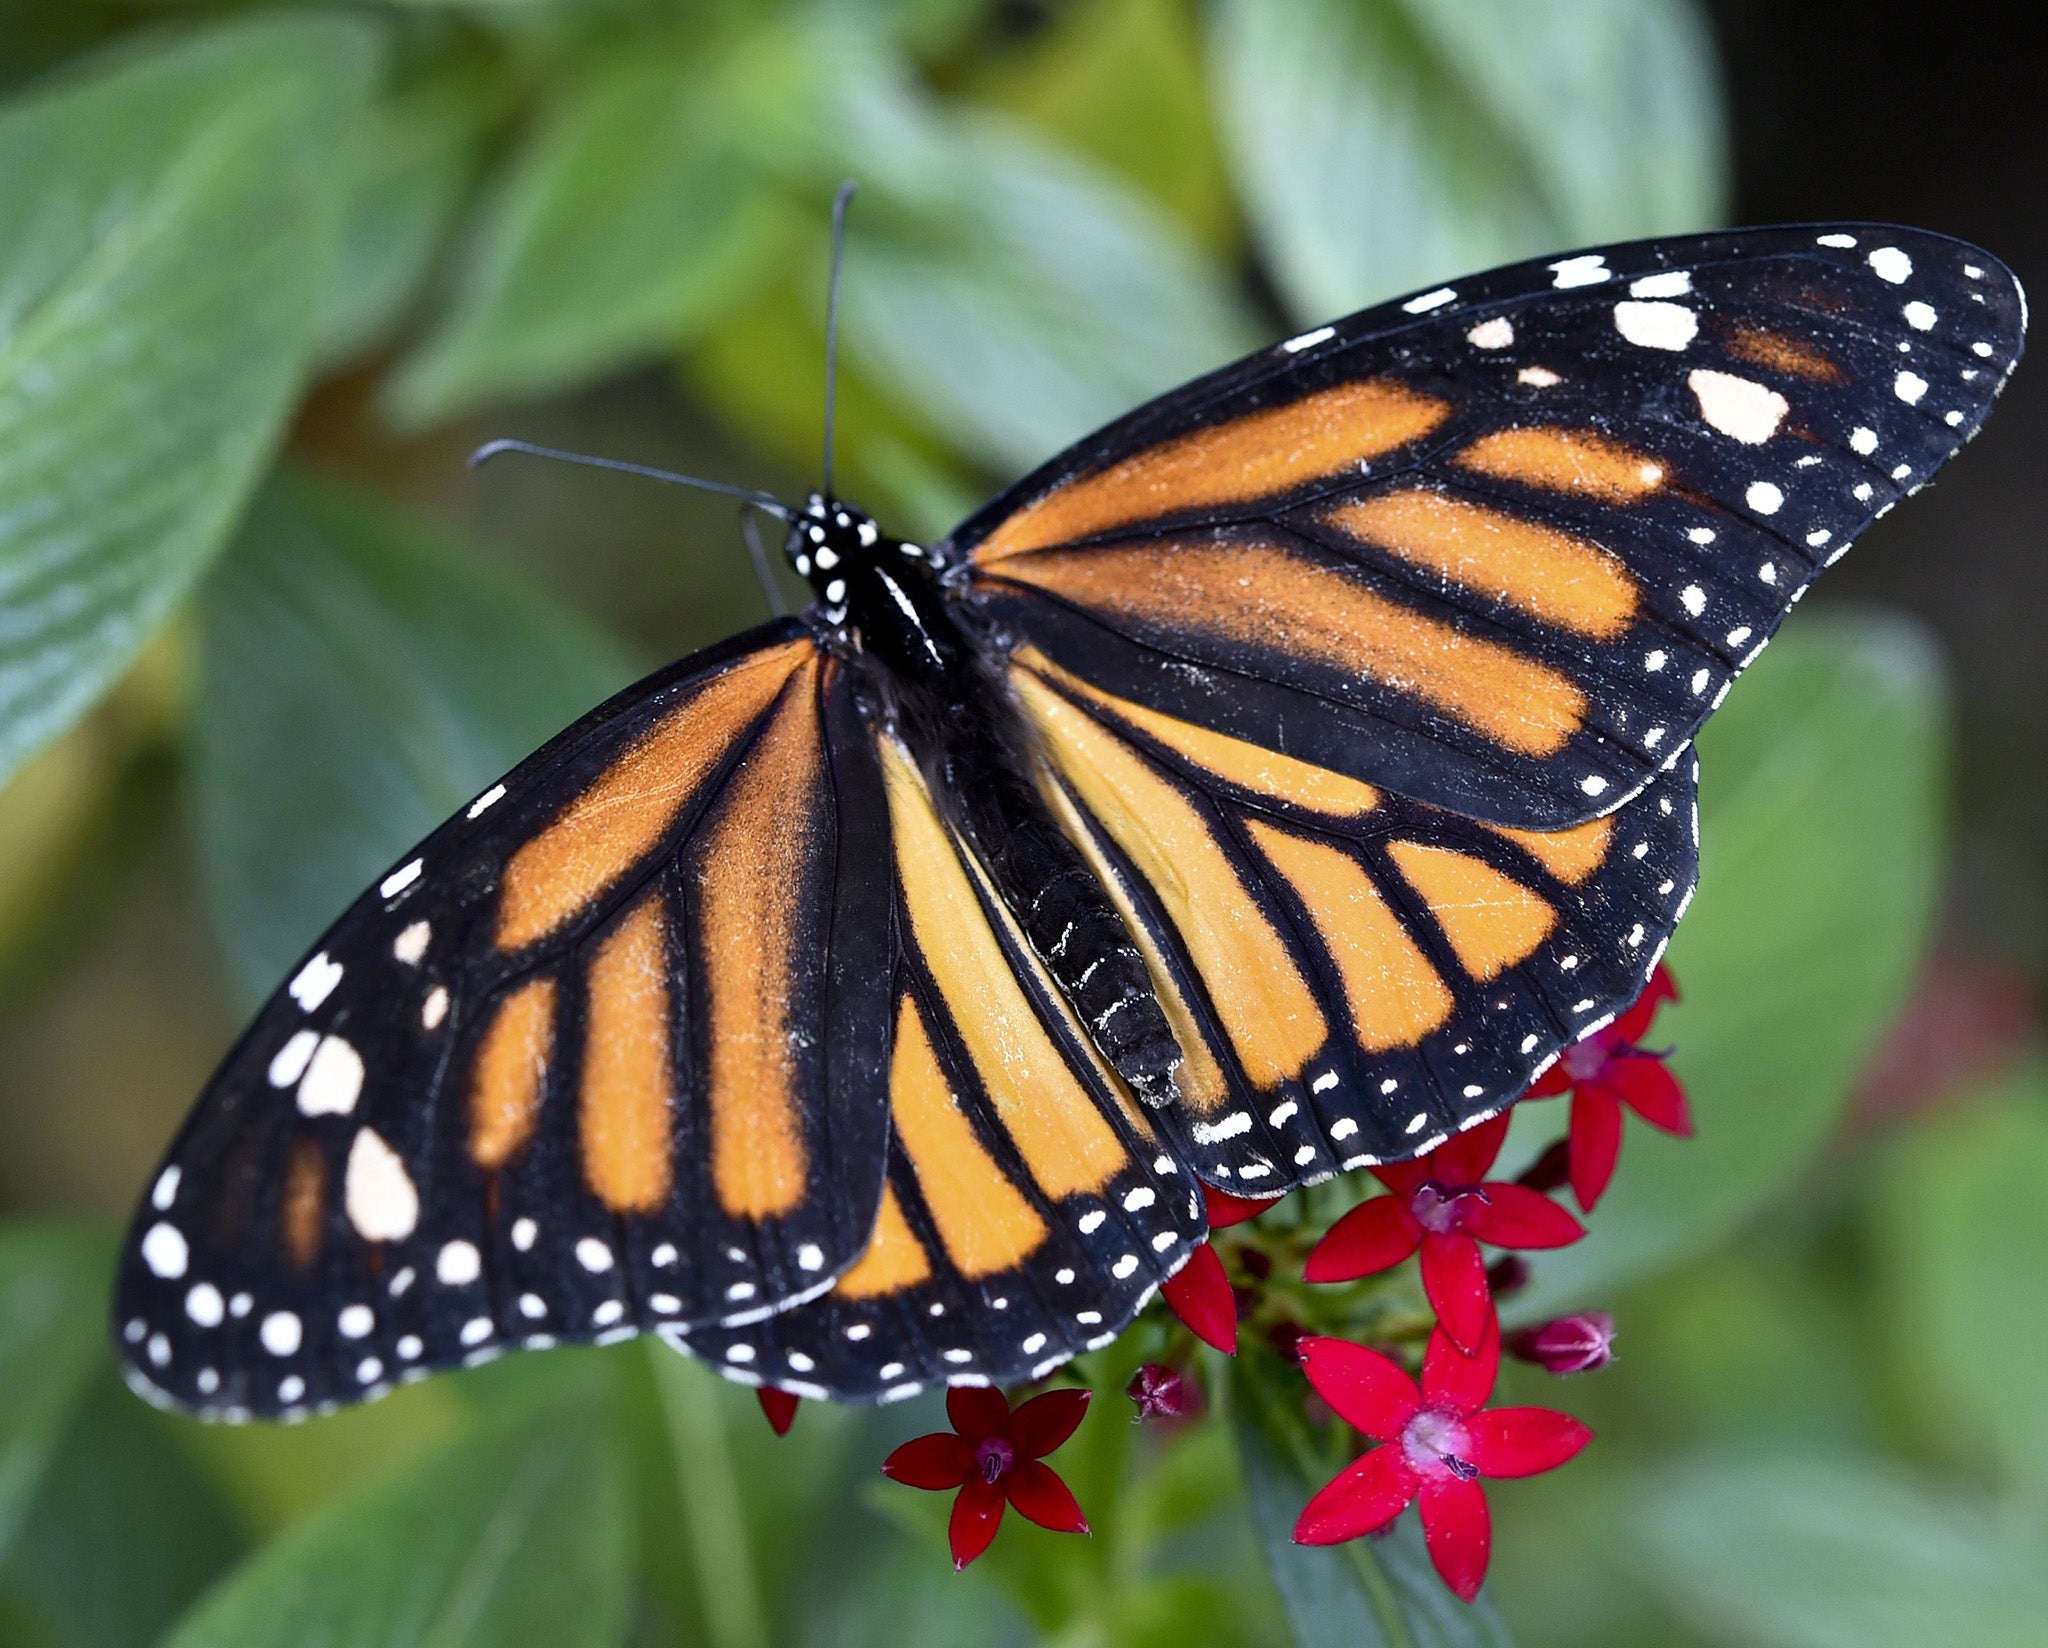 Monarch butterflies were called 'Harvest butterflies' by Native American tribes because they arrived at the same time as the corn harvest